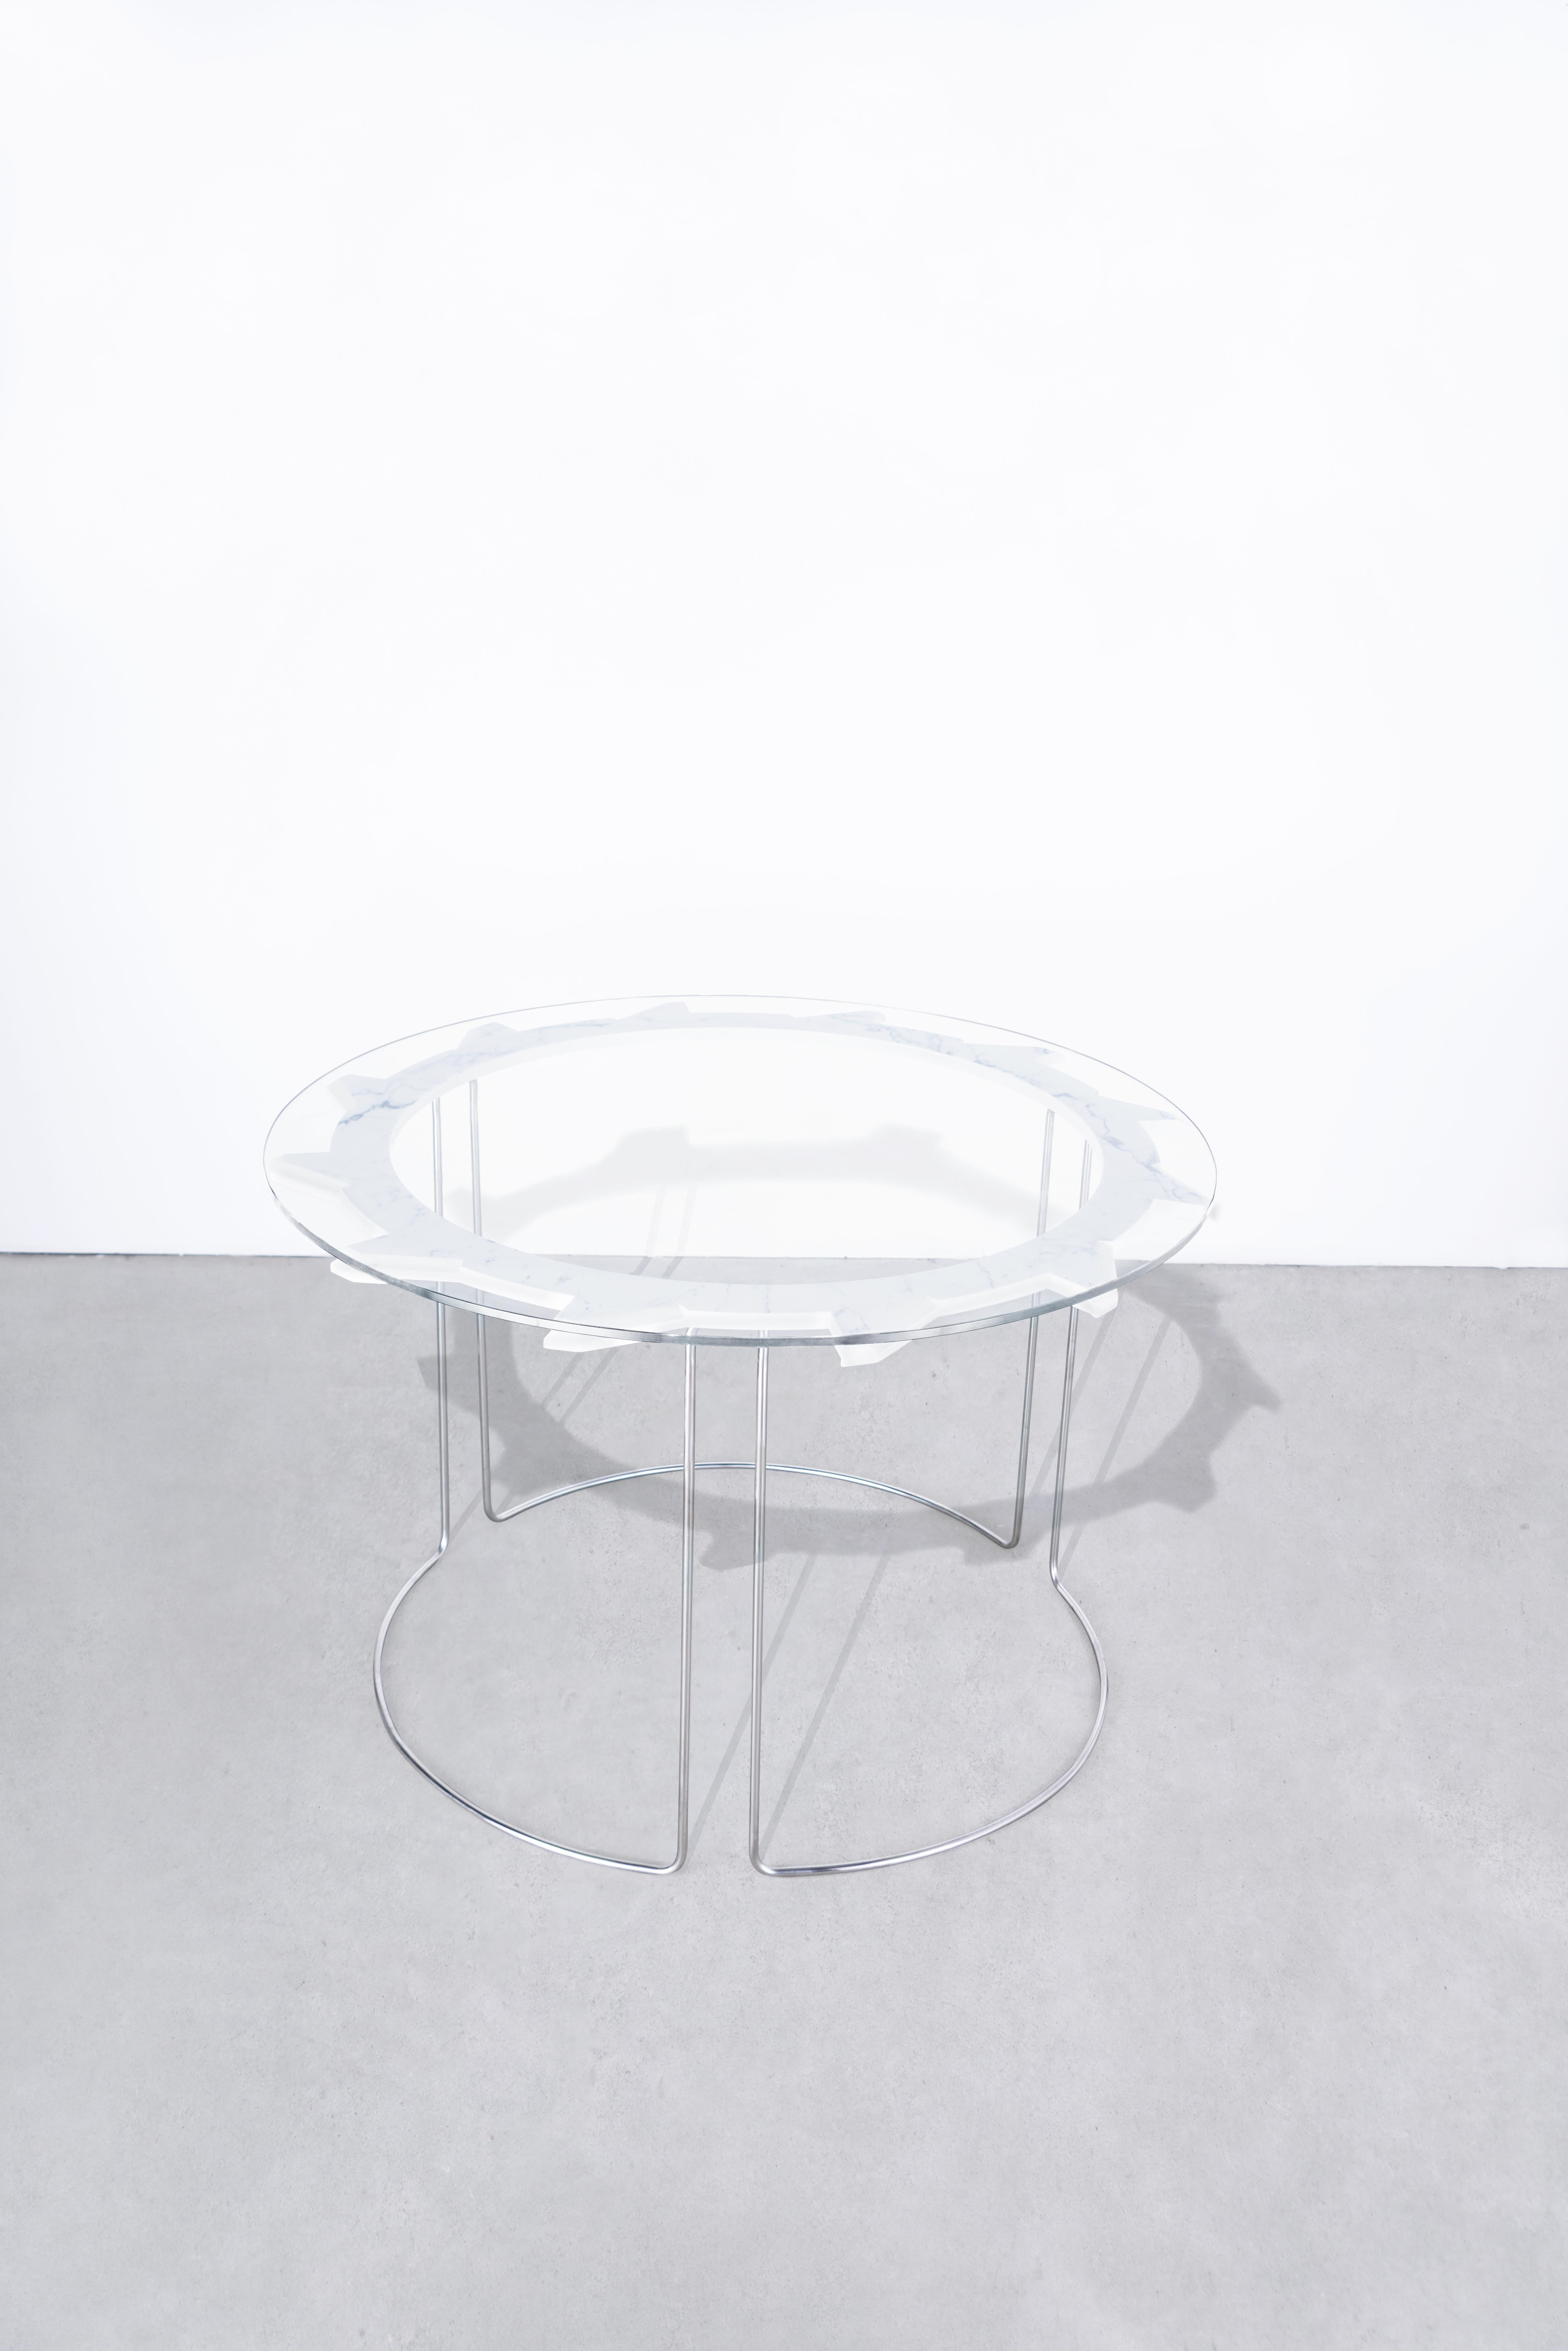 DESCRIPTION
Water jet cut, hand-beveled + hand-polished carrara marble table, with tempered glass top. 
Hand-formed + hand-polished stainless steel legs, welded into one continuous table base.
Starphire glass top. 
Position alone, or nest with